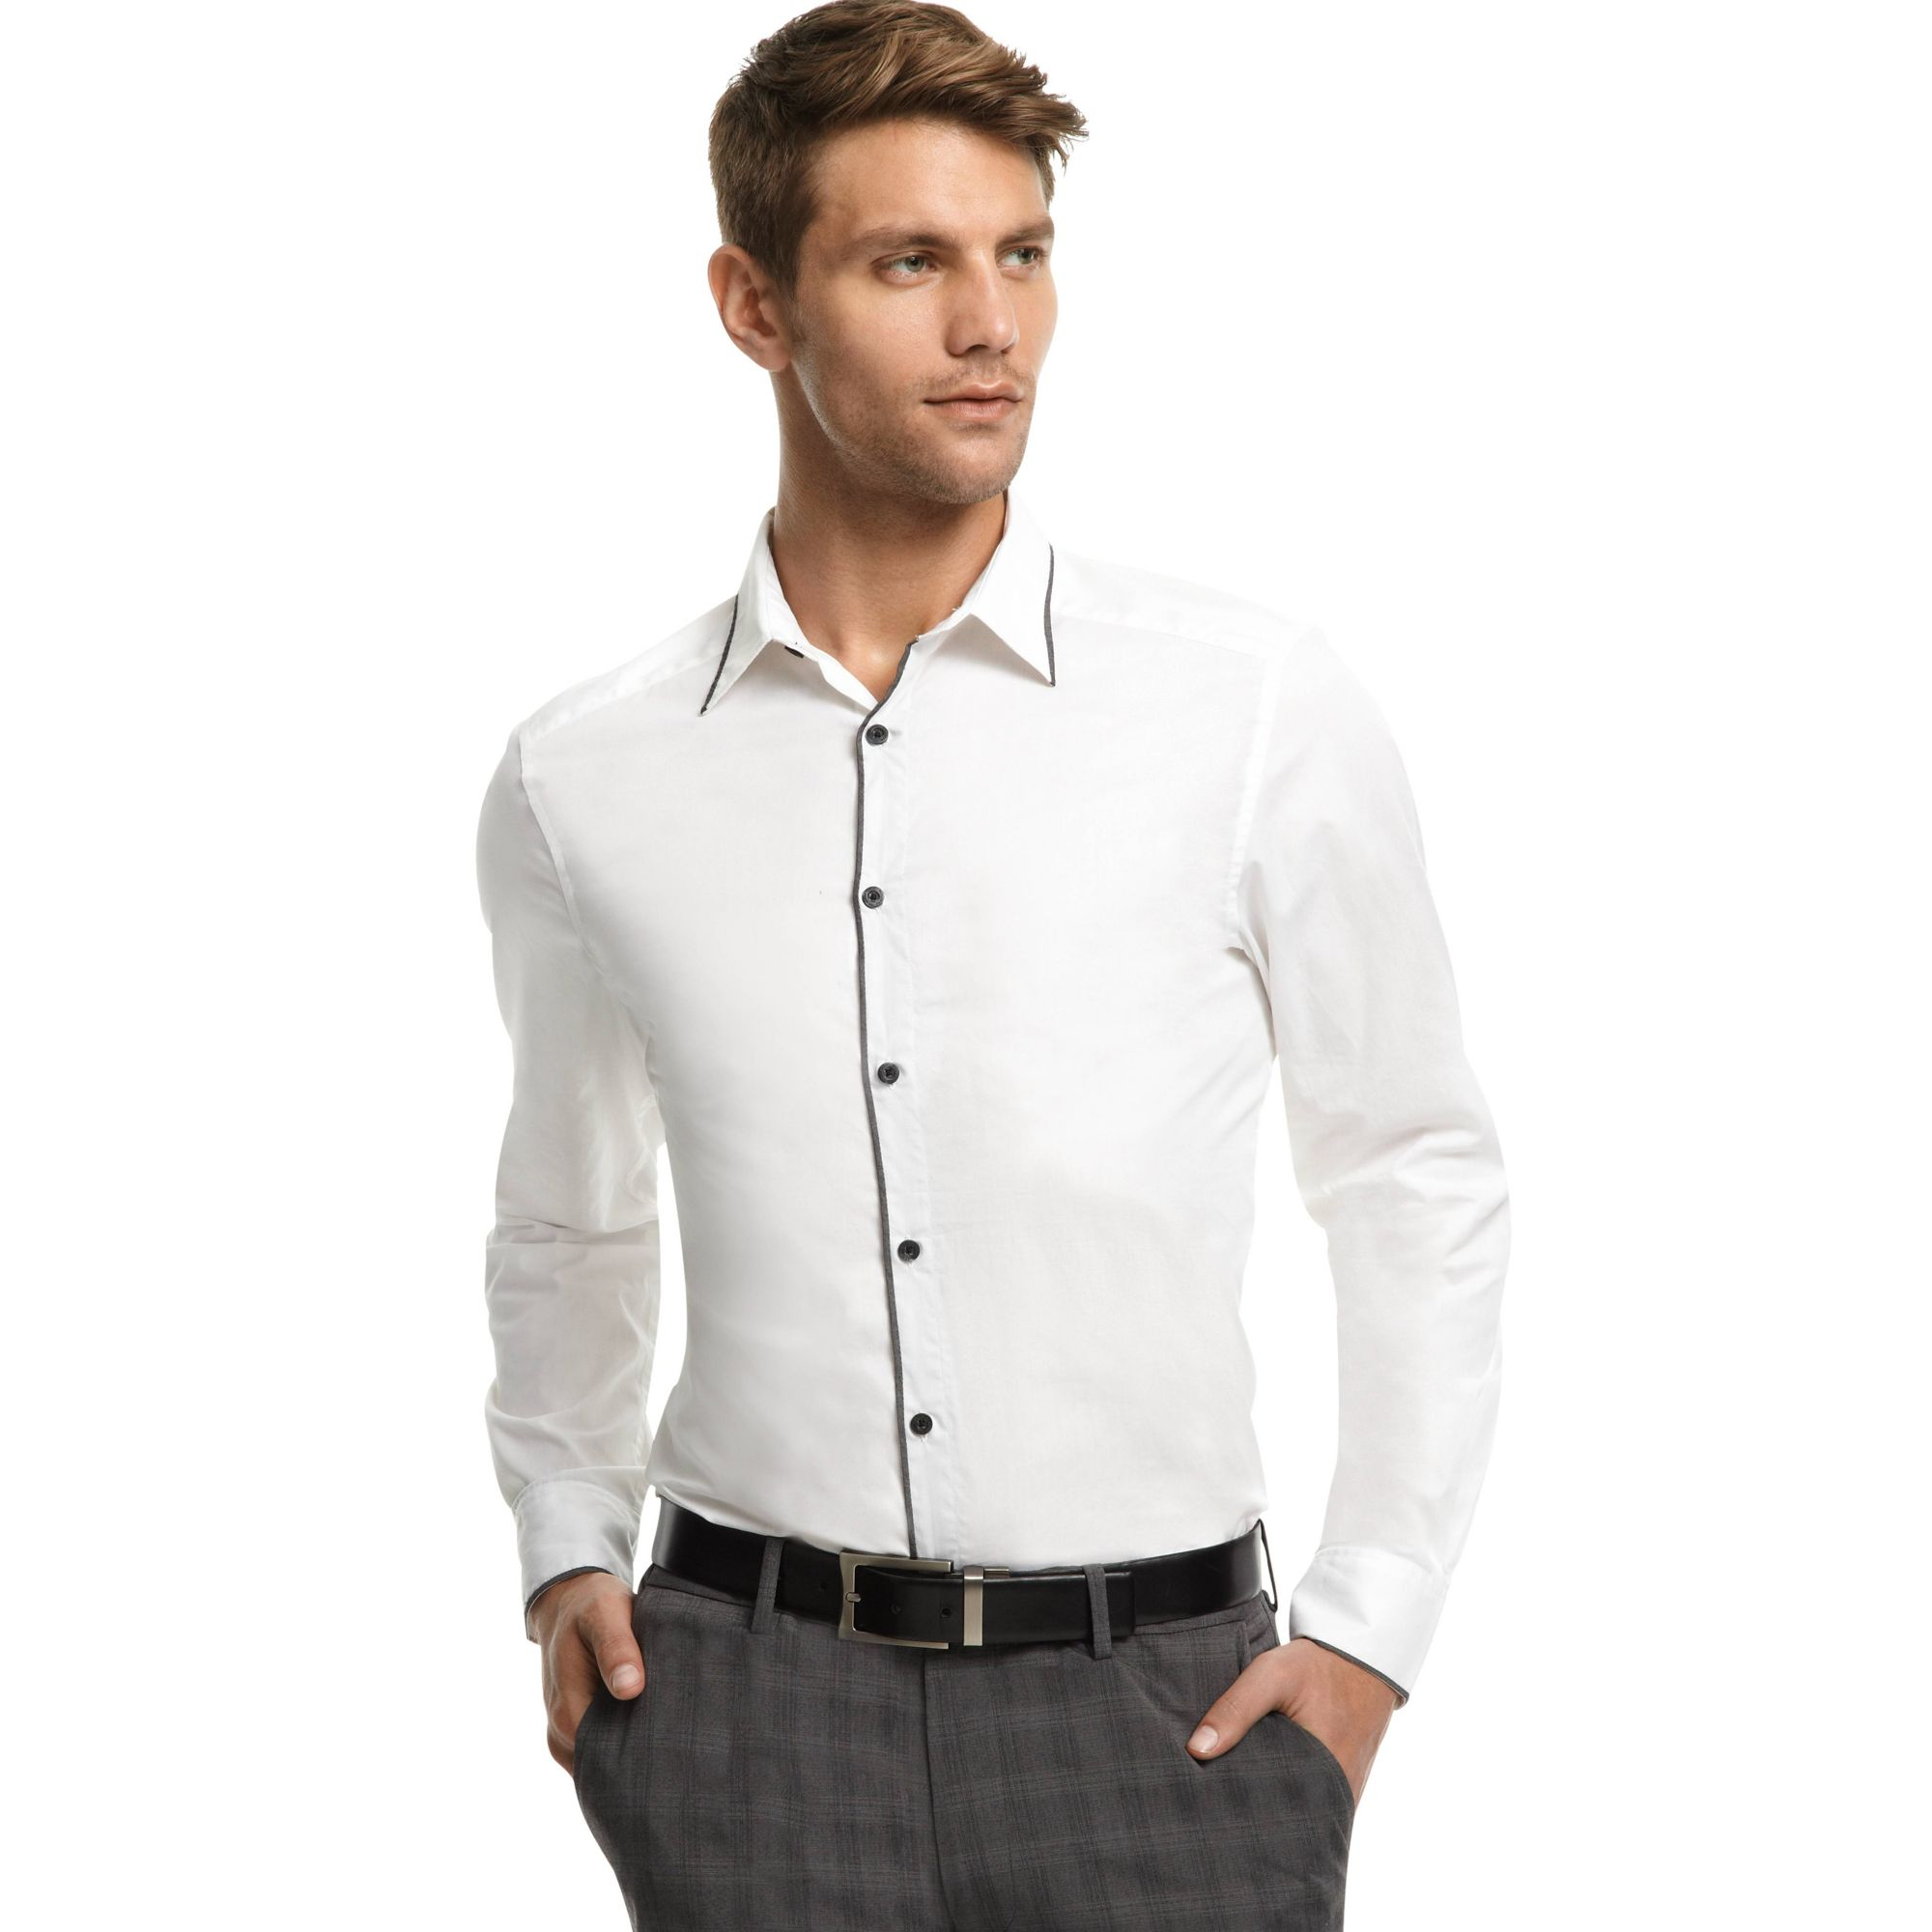 Lyst - Kenneth cole reaction Long Sleeve Dressy Contrast Trim Shirt in ...